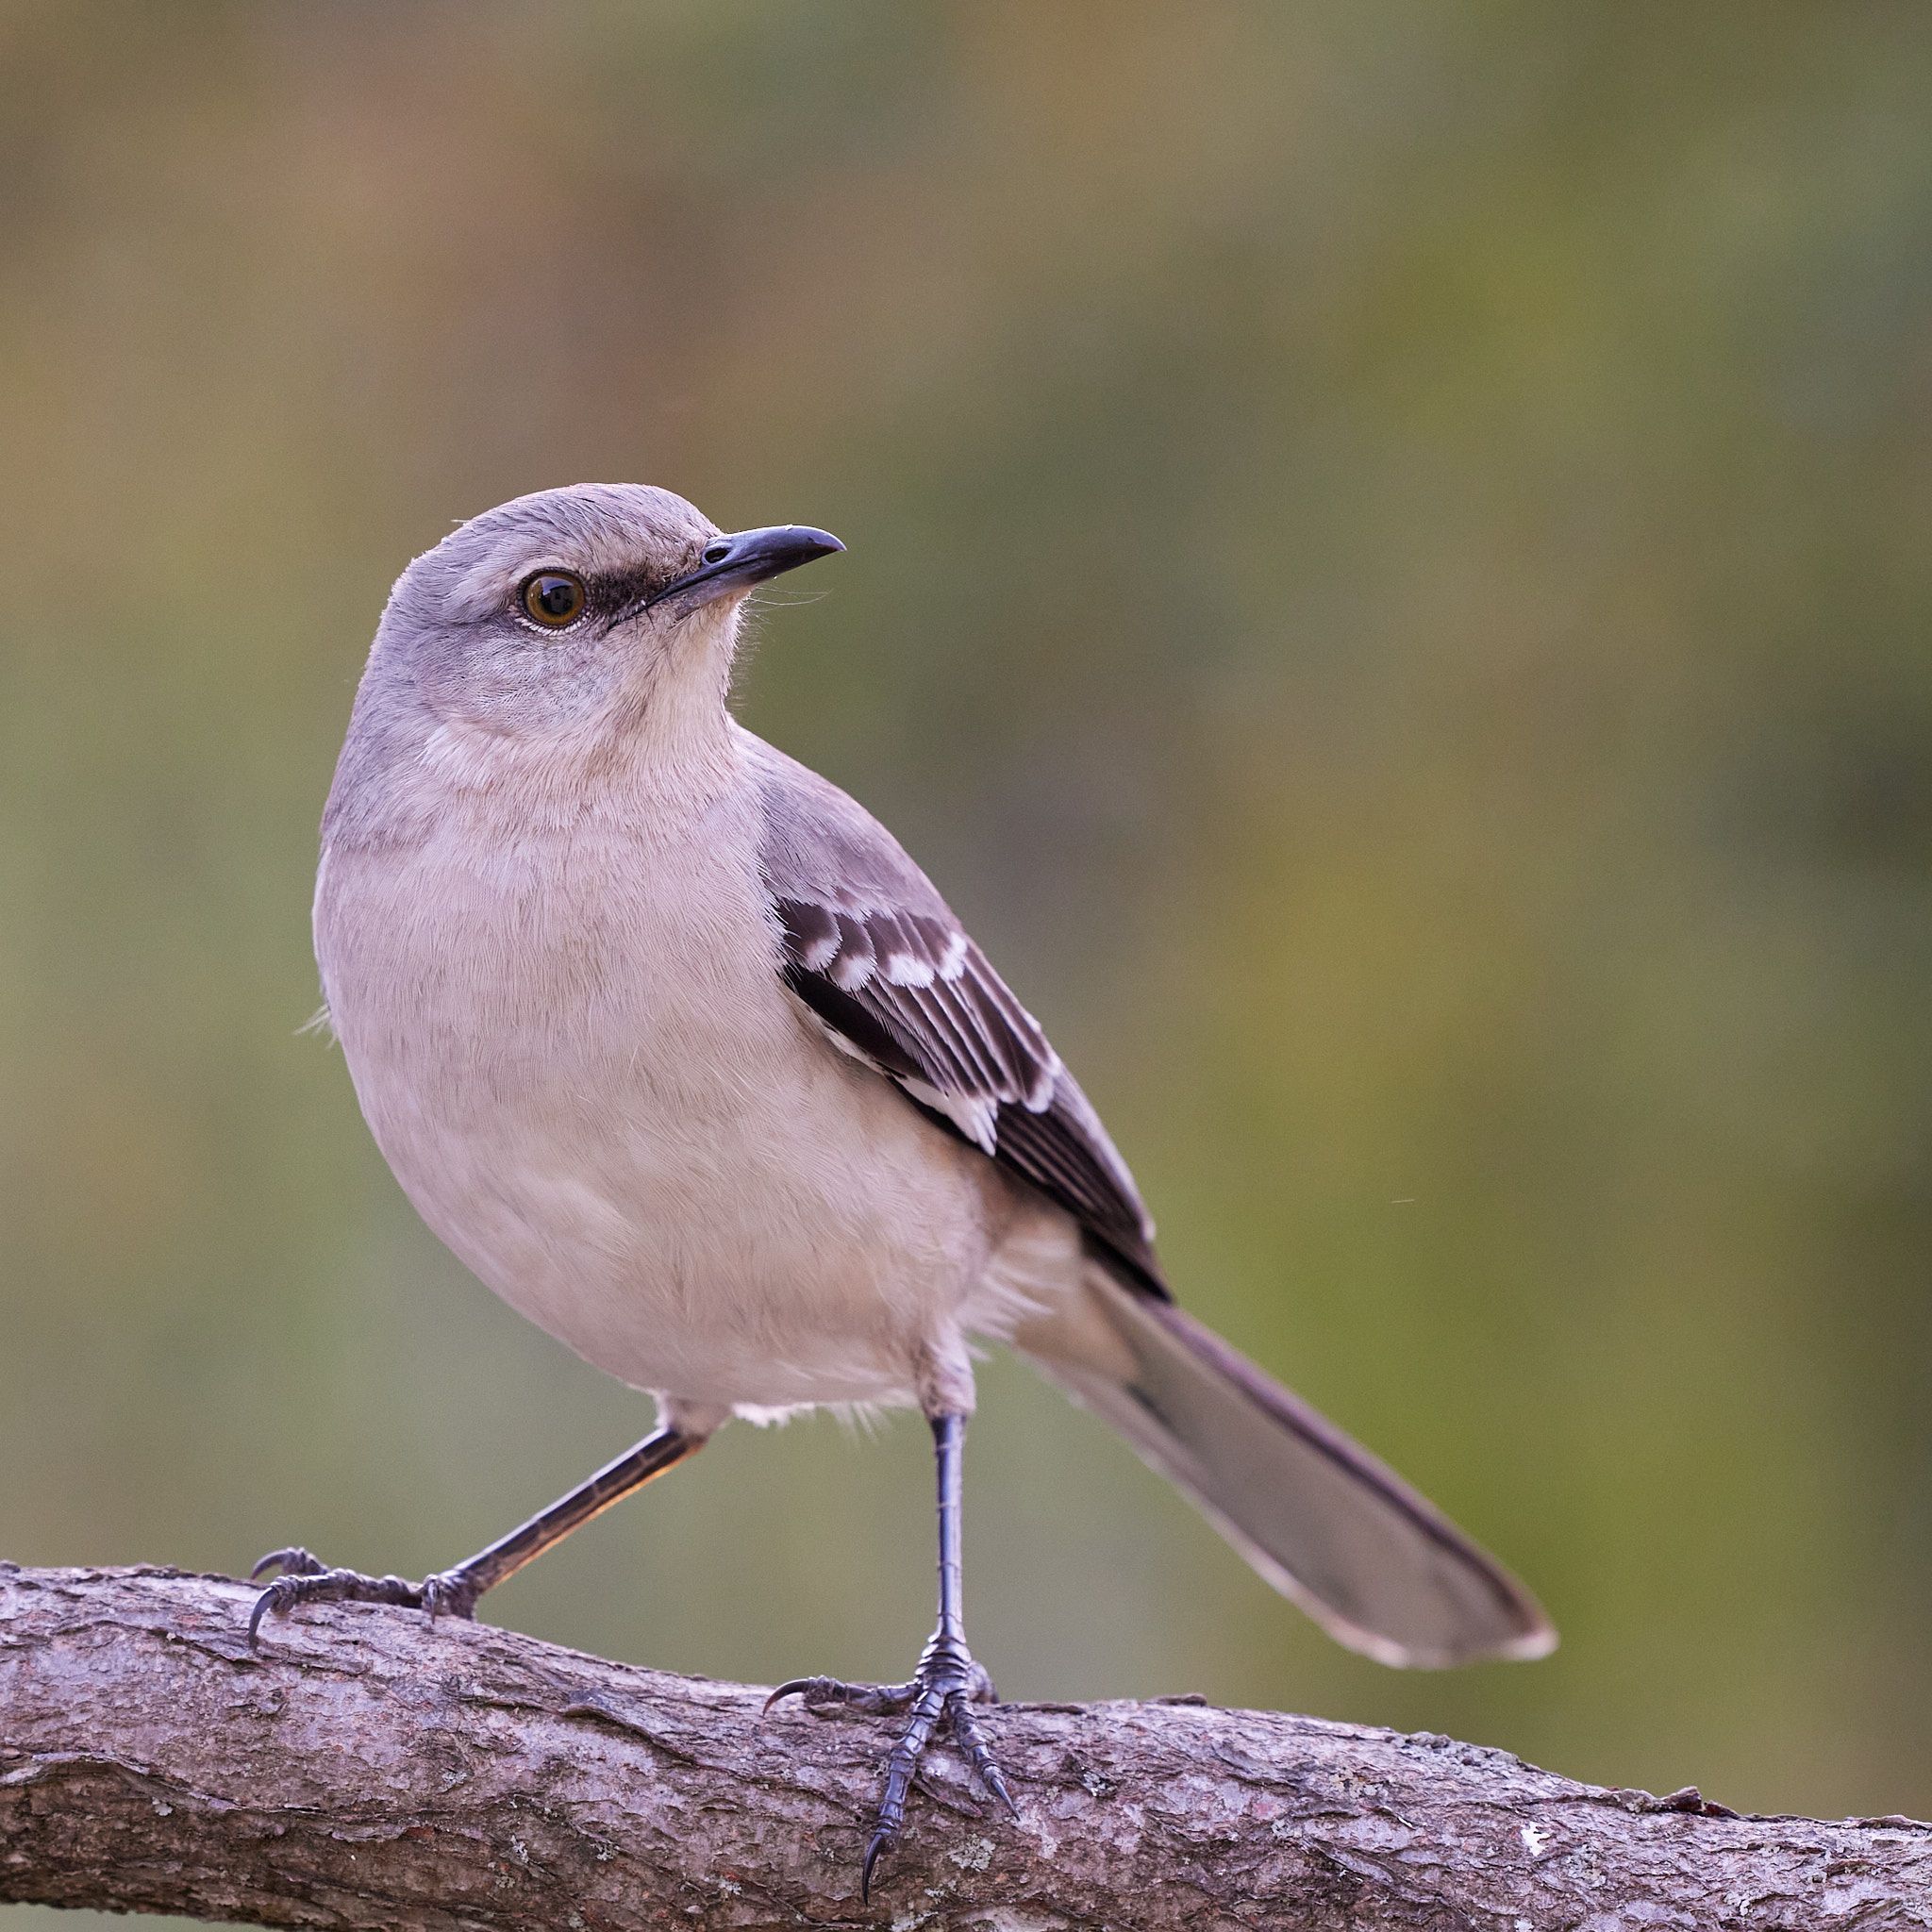 This mockingbird seems frozen between frantic dashes. When in motion, it is difficult to track, but then it will just sit there and stare intensely.